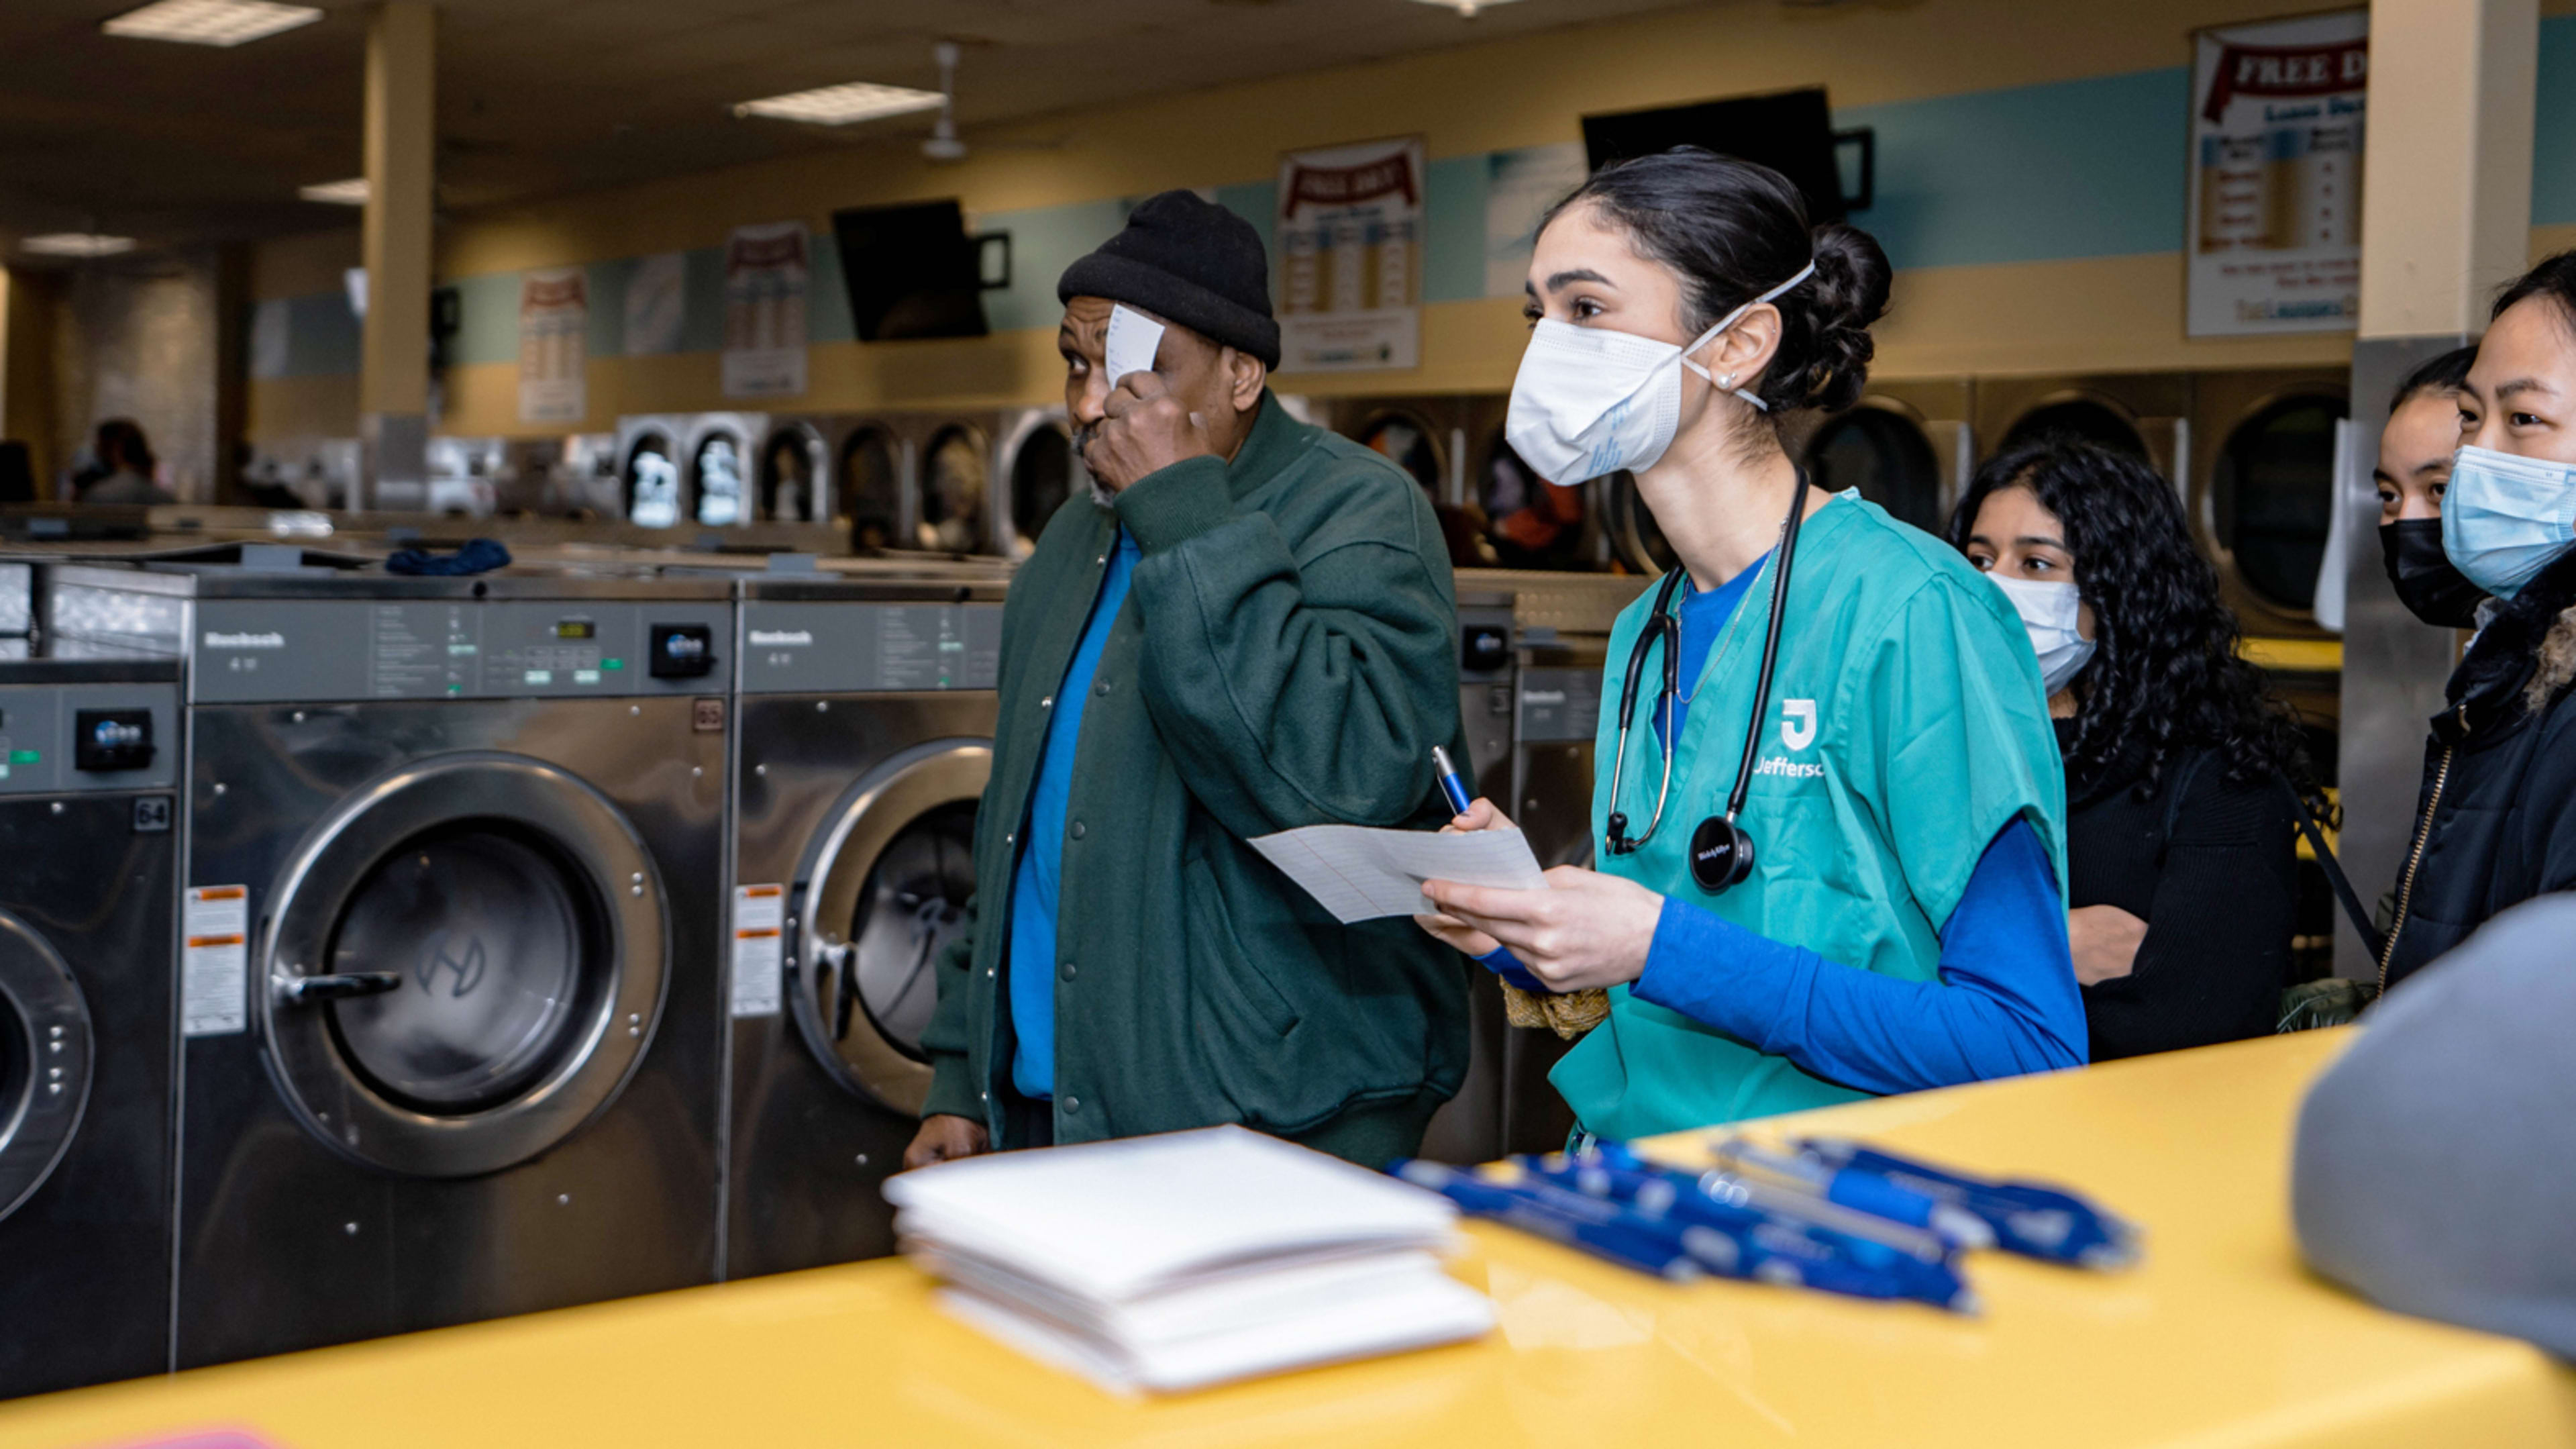 This startup is turning the laundromat into the doctor’s office